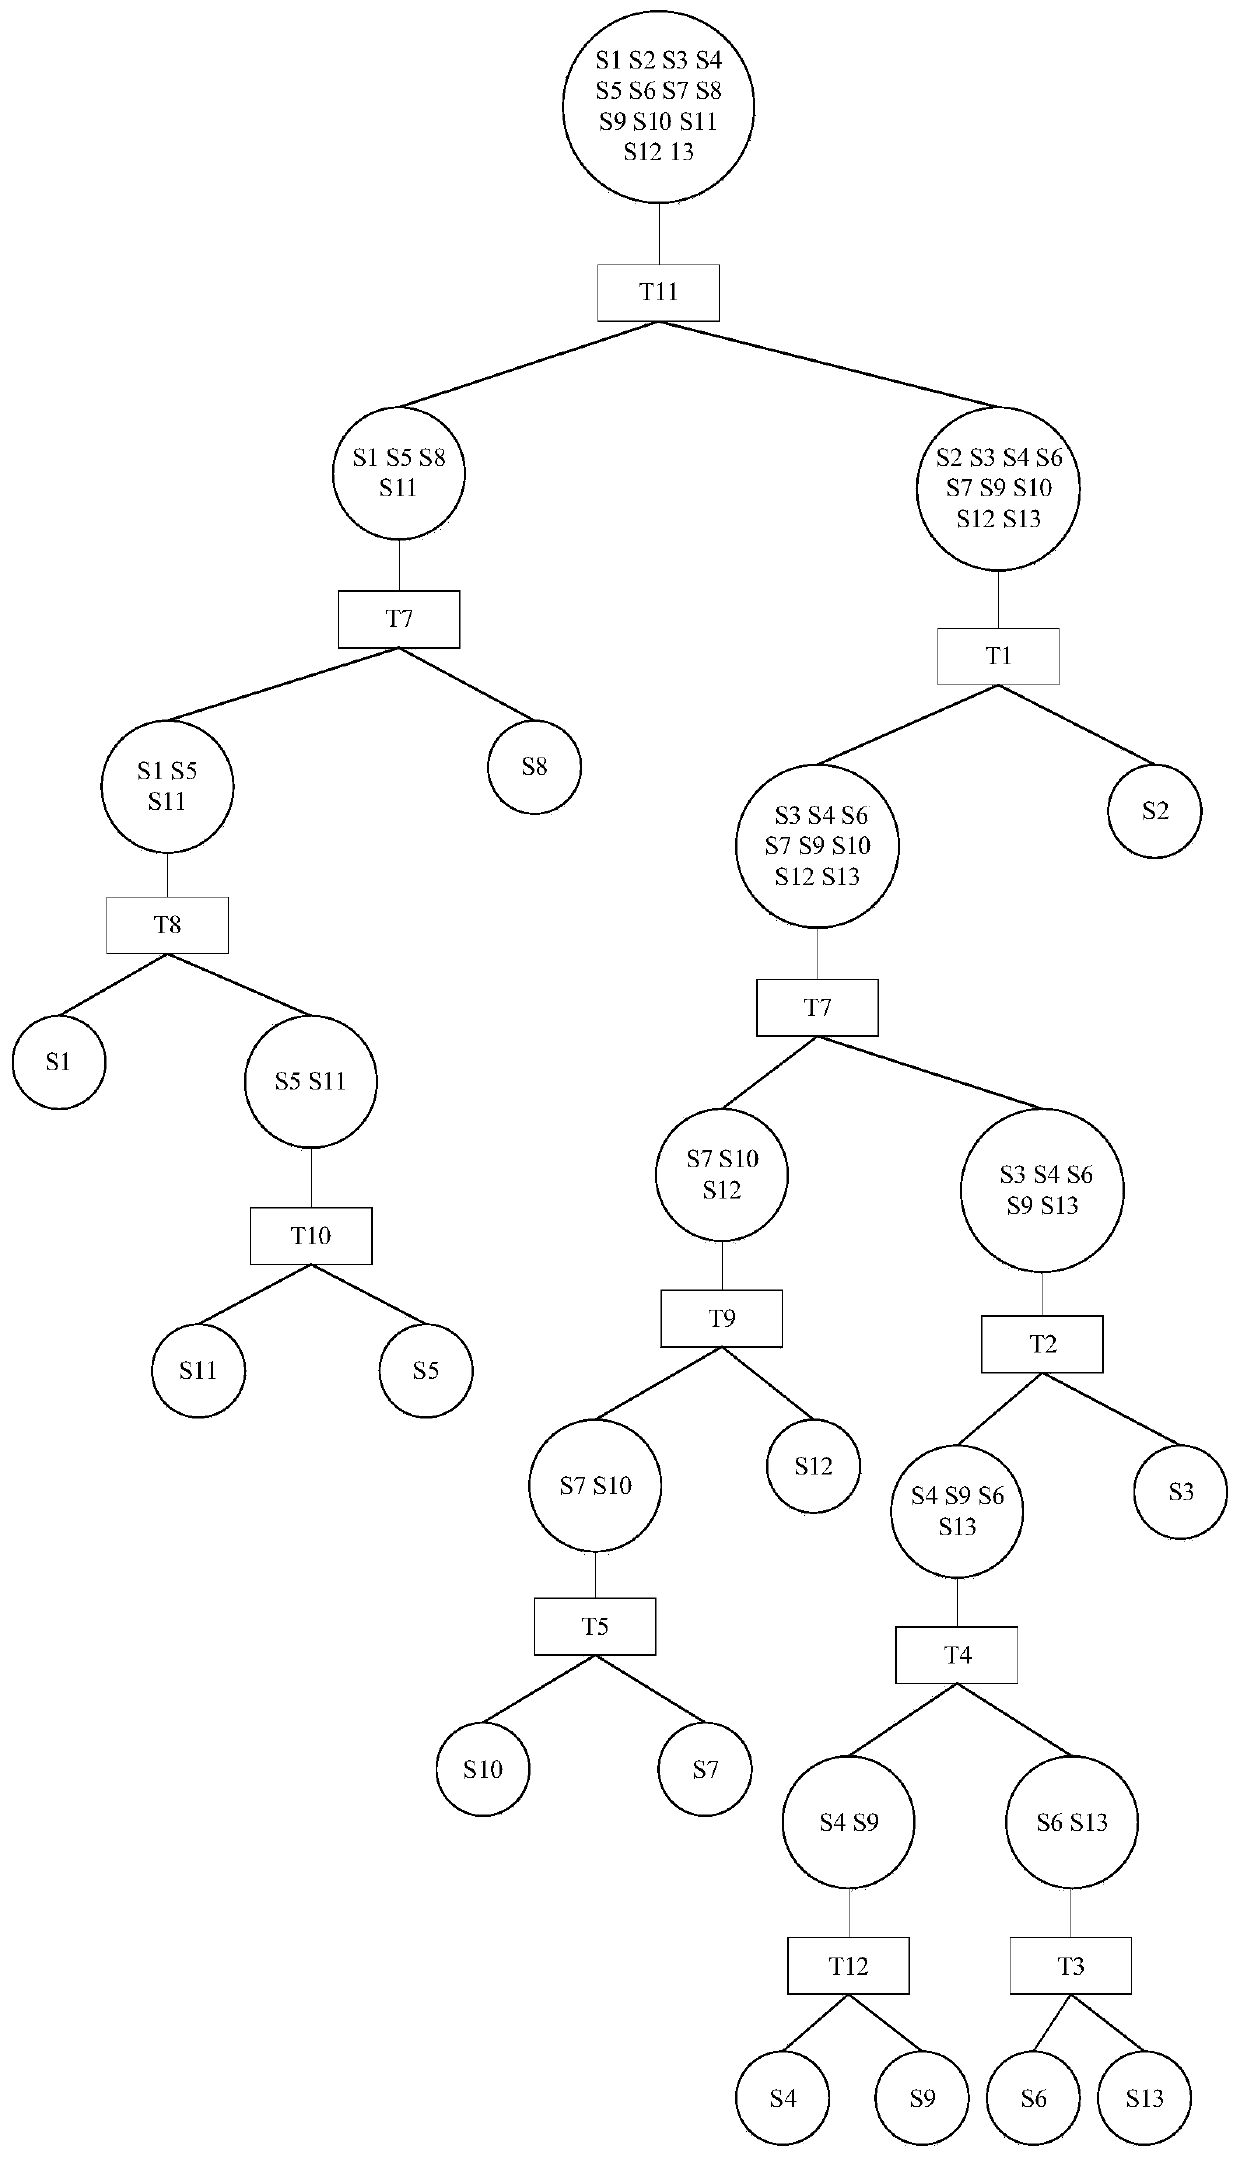 Fault diagnosis tree generation method based on information entropy and dynamic programming